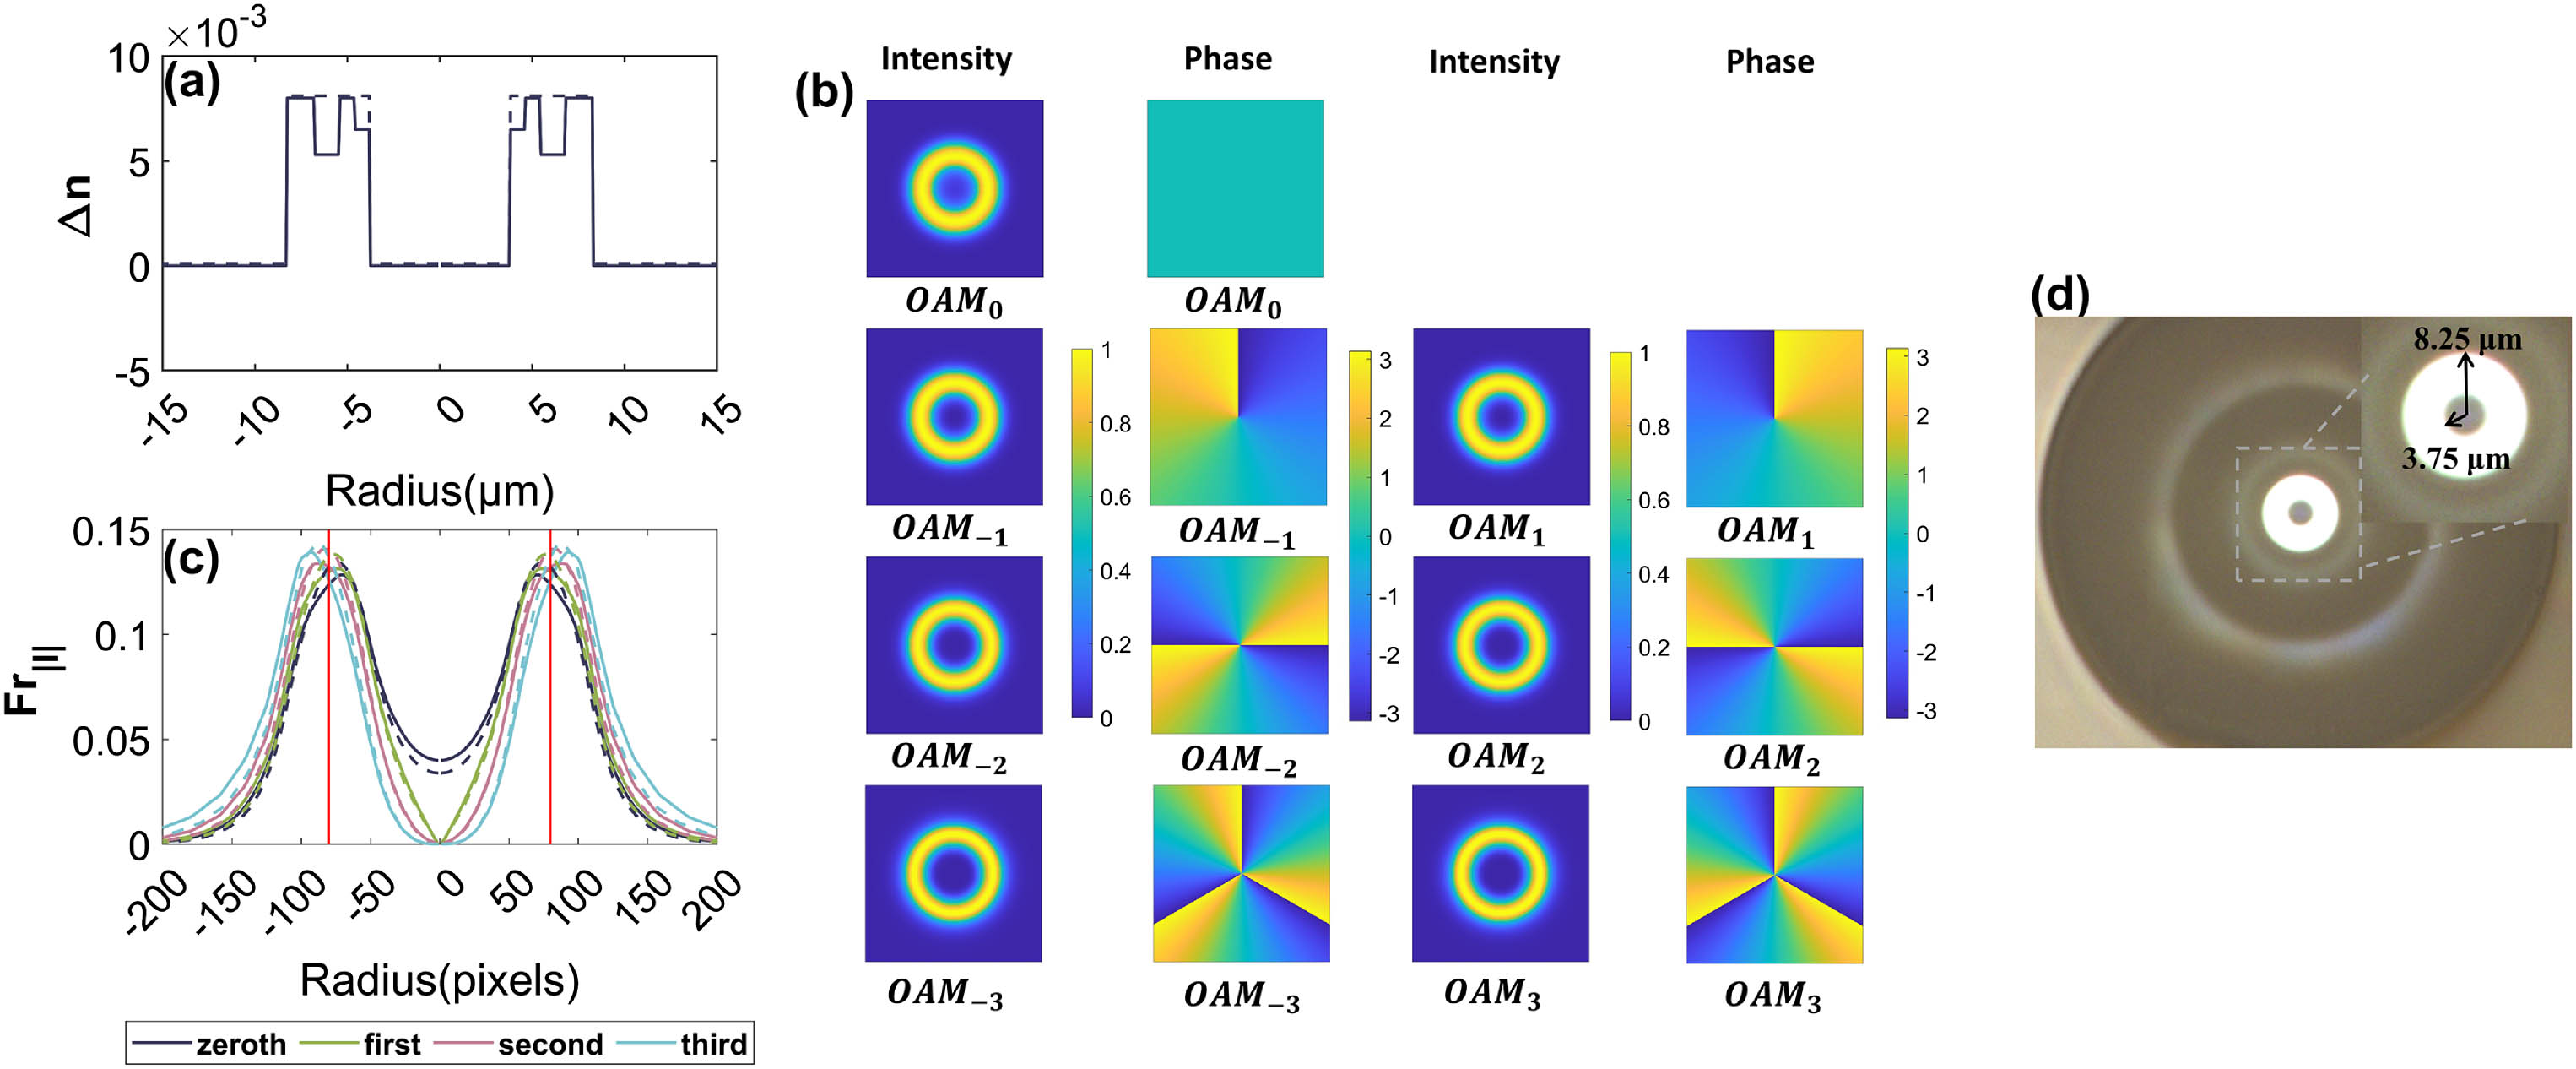 Refractive index distribution and mode characteristics of the RCF used for demonstration. (a) Refractive index profile of the RCF. (b) The intensity distribution and phase distribution of each OAM mode. (c) The radial field functions of OAM modes with different azimuthal orders. The actual length range is consistent with (a). (d) The cross-section image of the RCF captured by a microscope.